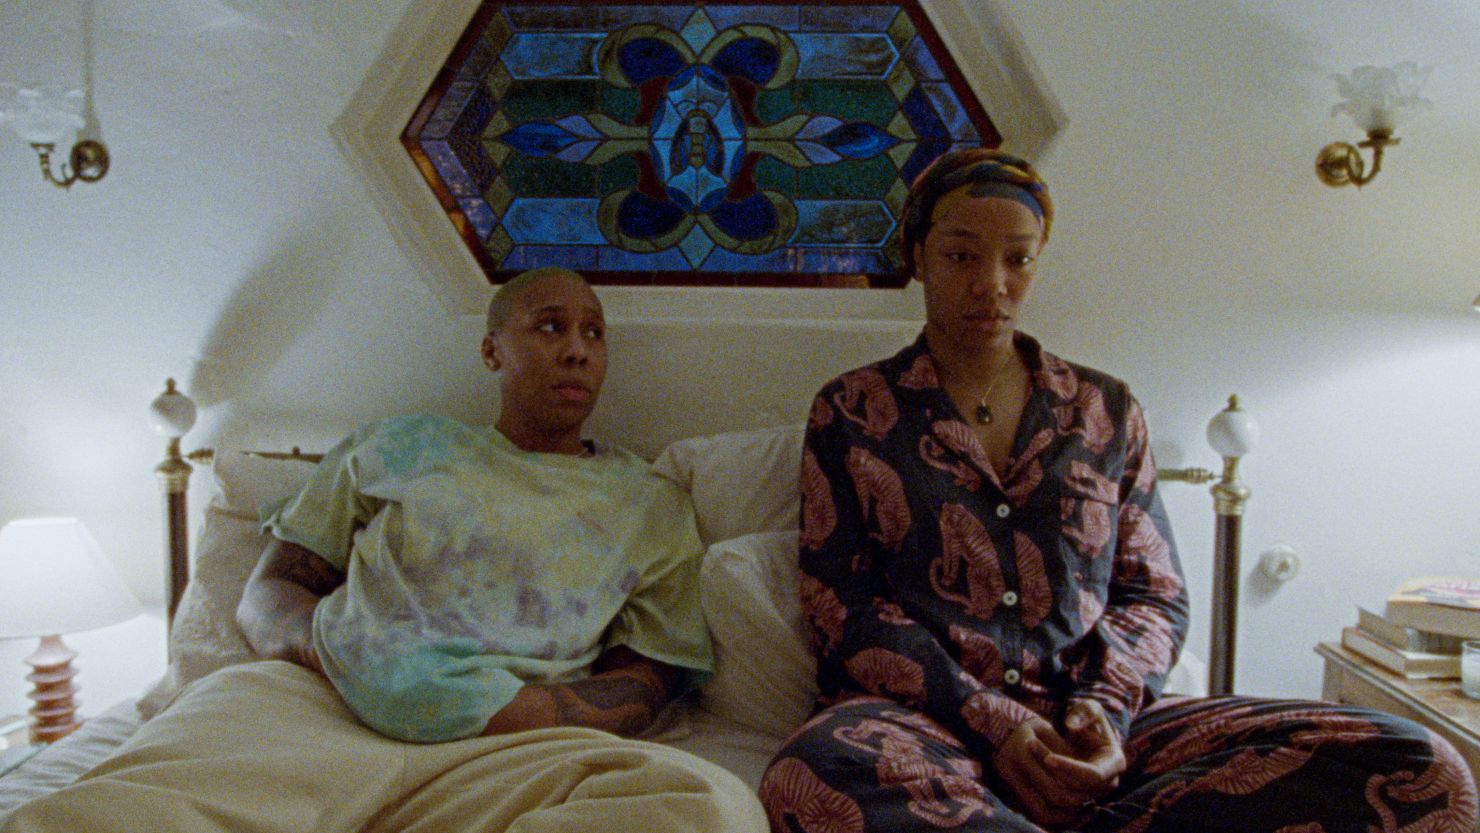 Lena Waithe and Naomi Ackie star in season 3 of "Master of None." 